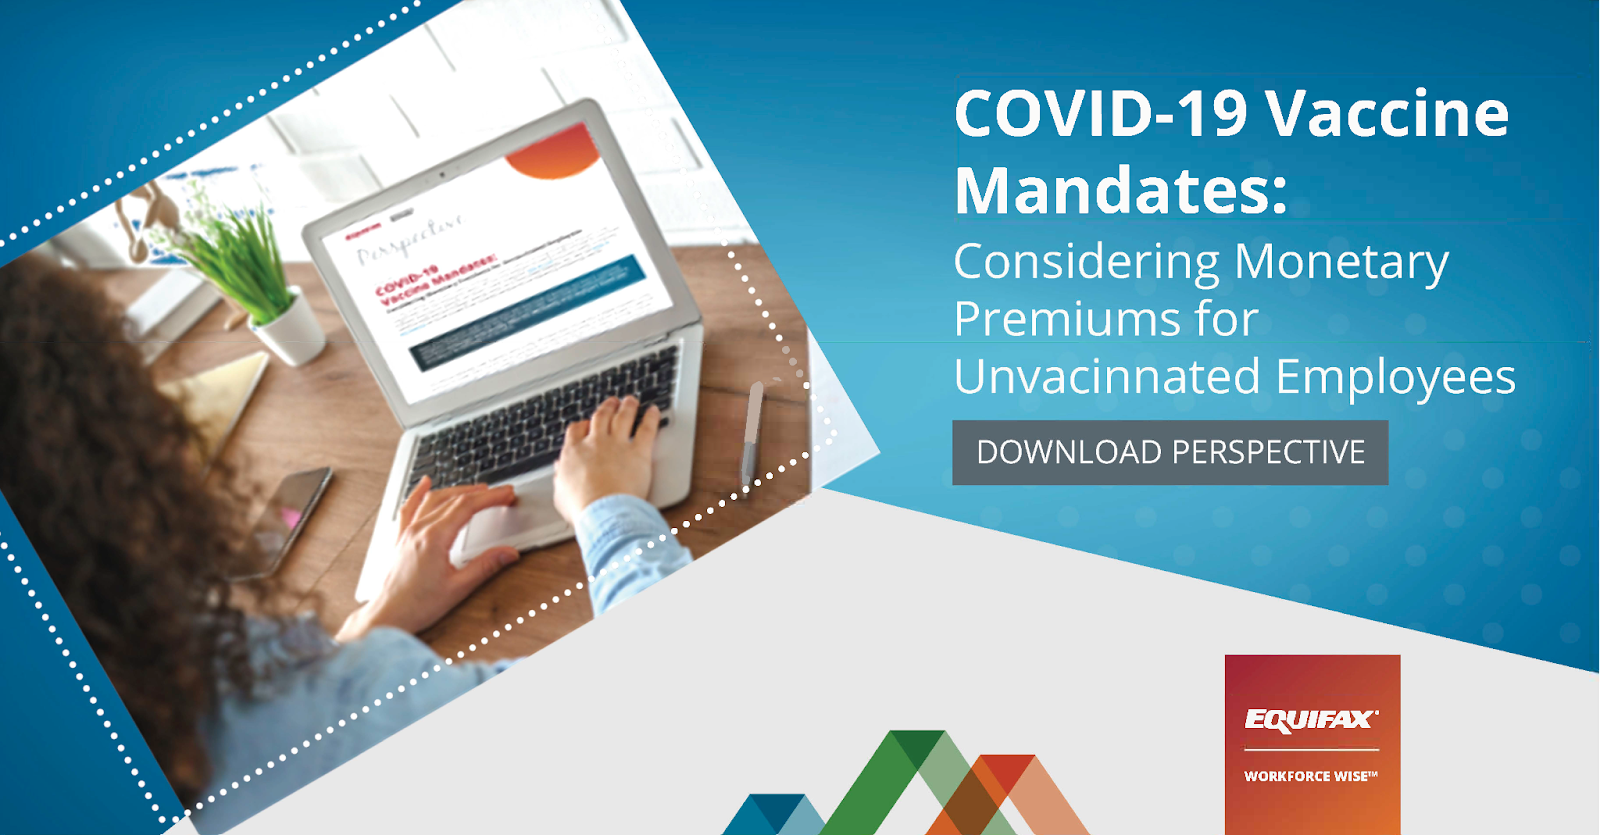 COVID-19 Vaccine Mandates: Considering Monetary Premiums for Unvaccinated Employees